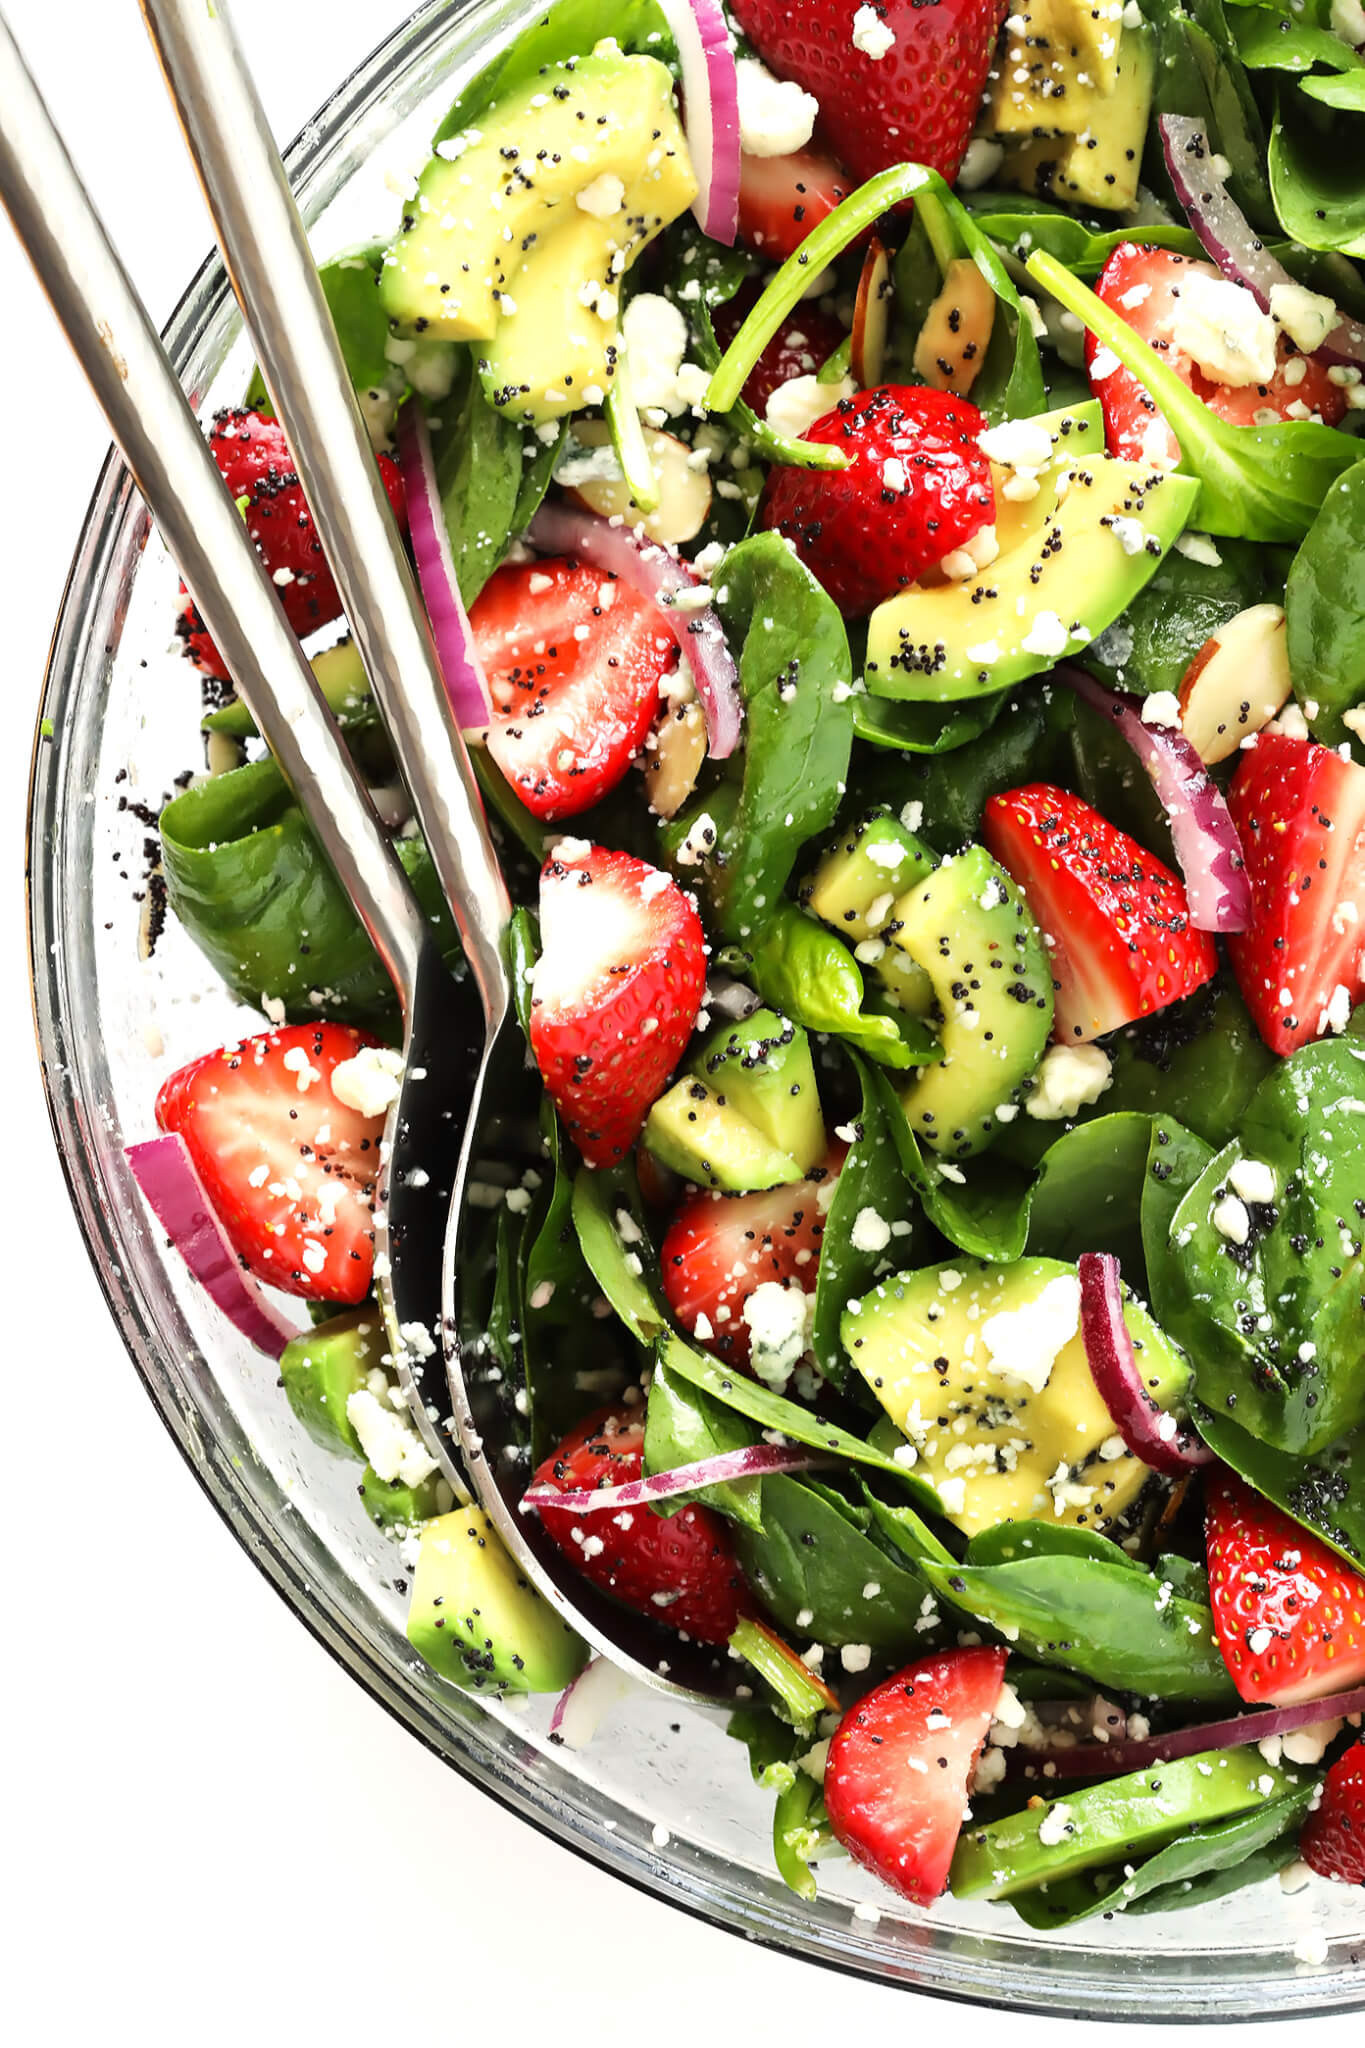 Recipes For Baby Spinach
 Avocado Strawberry Spinach Salad with Poppyseed